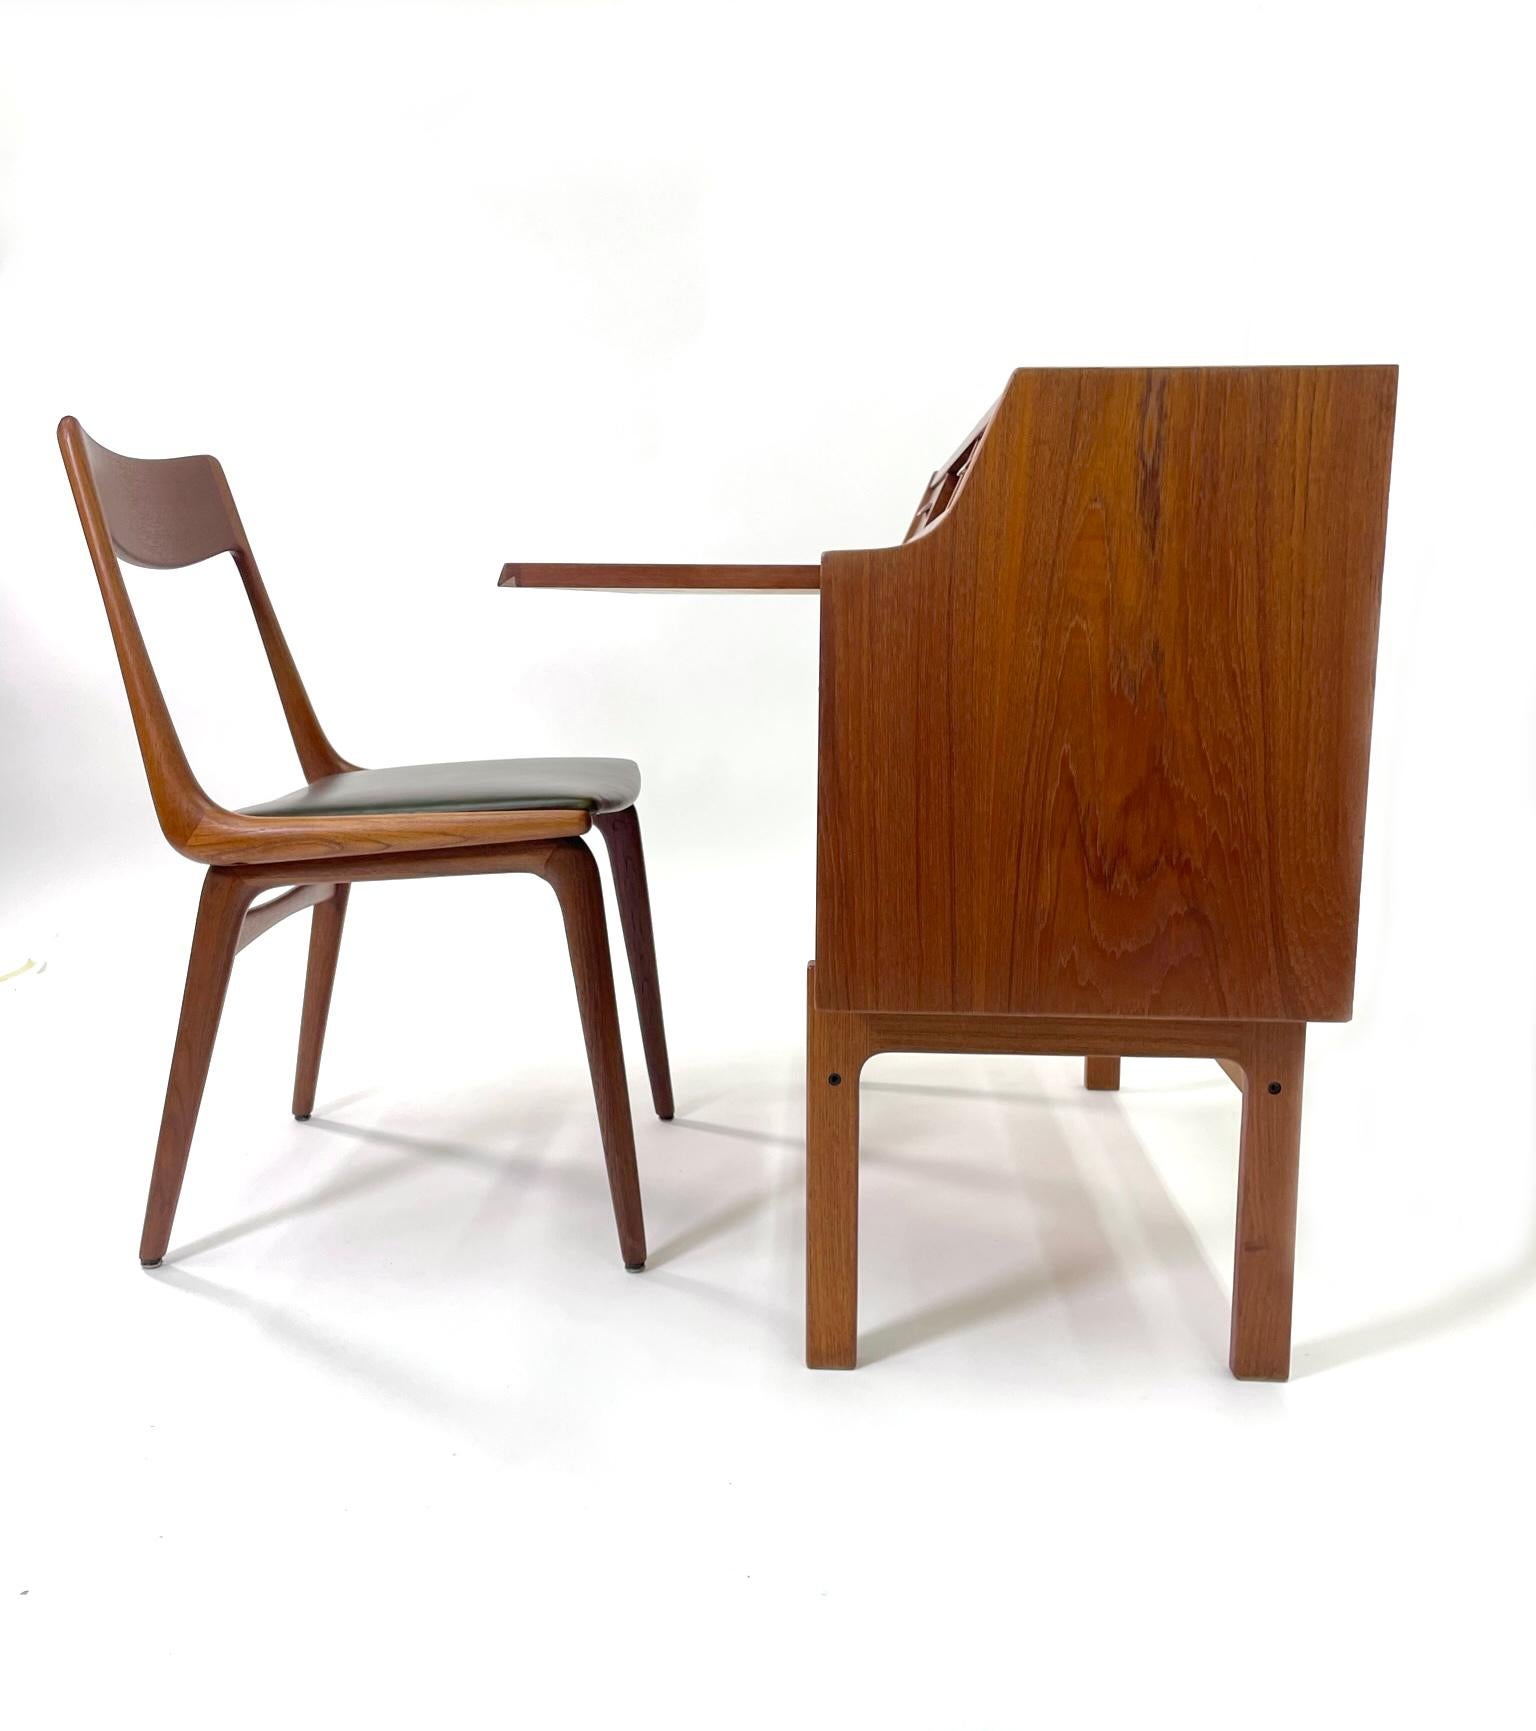 
This secretary desk in teak is ideal for collectors who have a limited space but are unwilling to compromise on style and functionality. This splendid secretary desk, designed by the influential Arne Wahl Iversen, is the quintessential example of